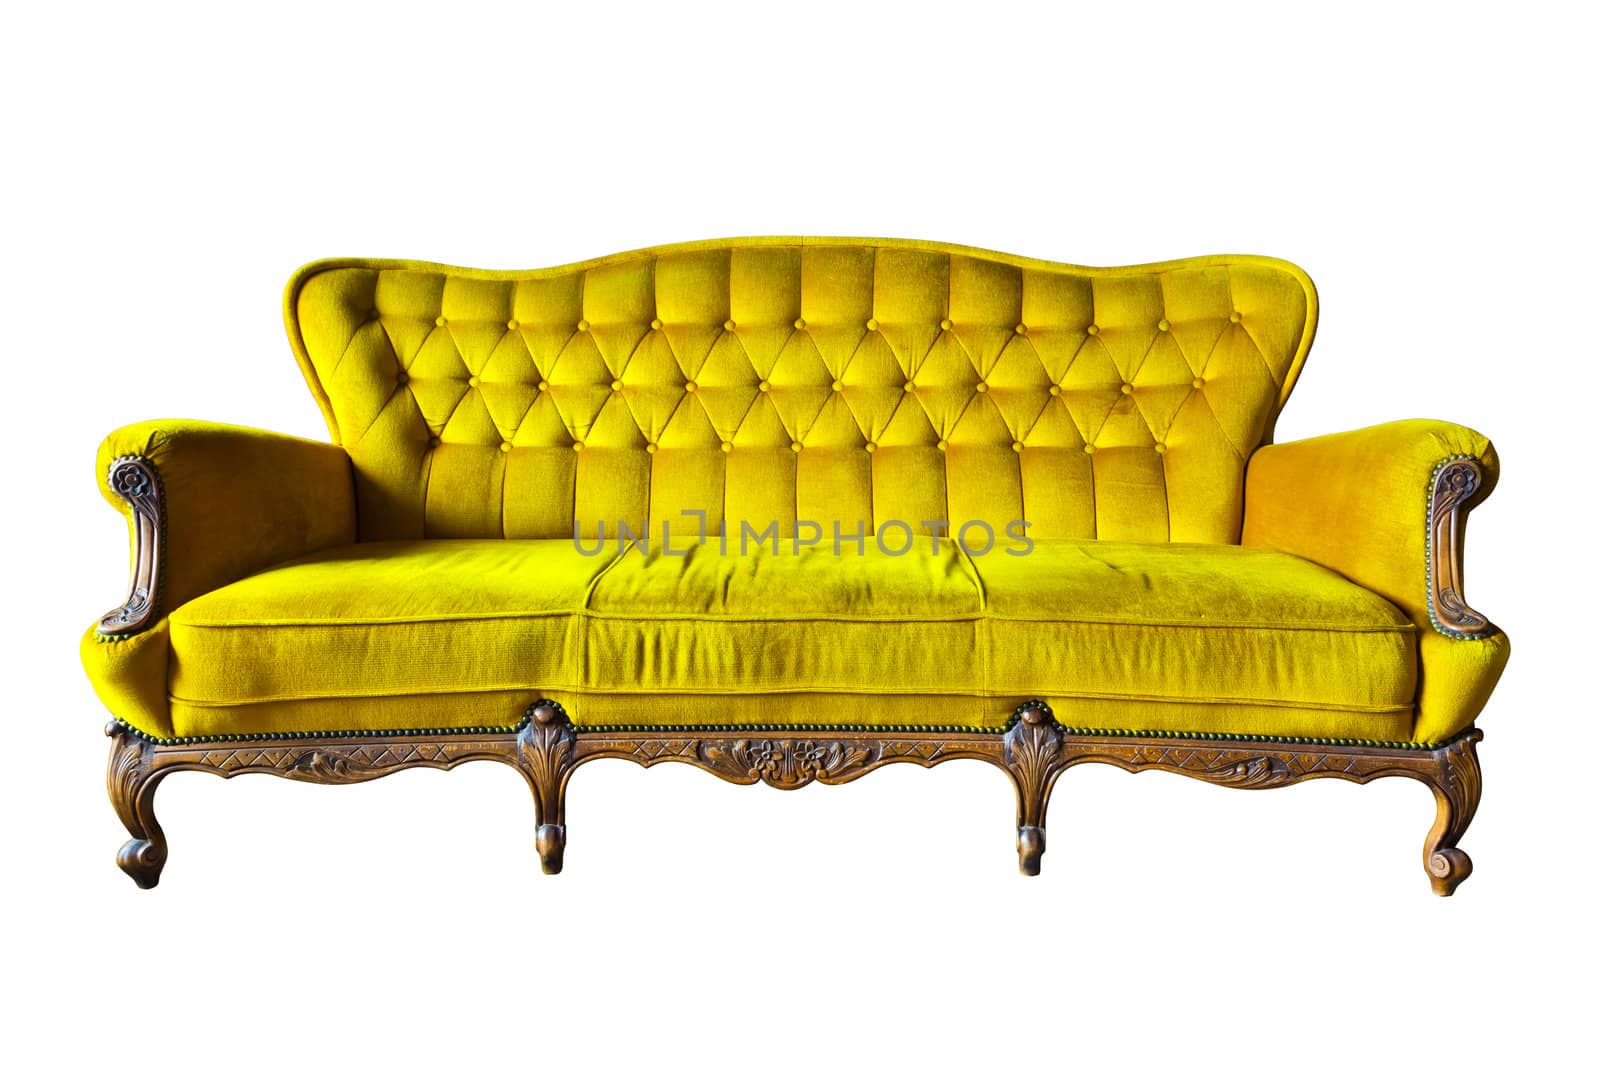 vintage yellow luxury armchair isolated with clipping path
